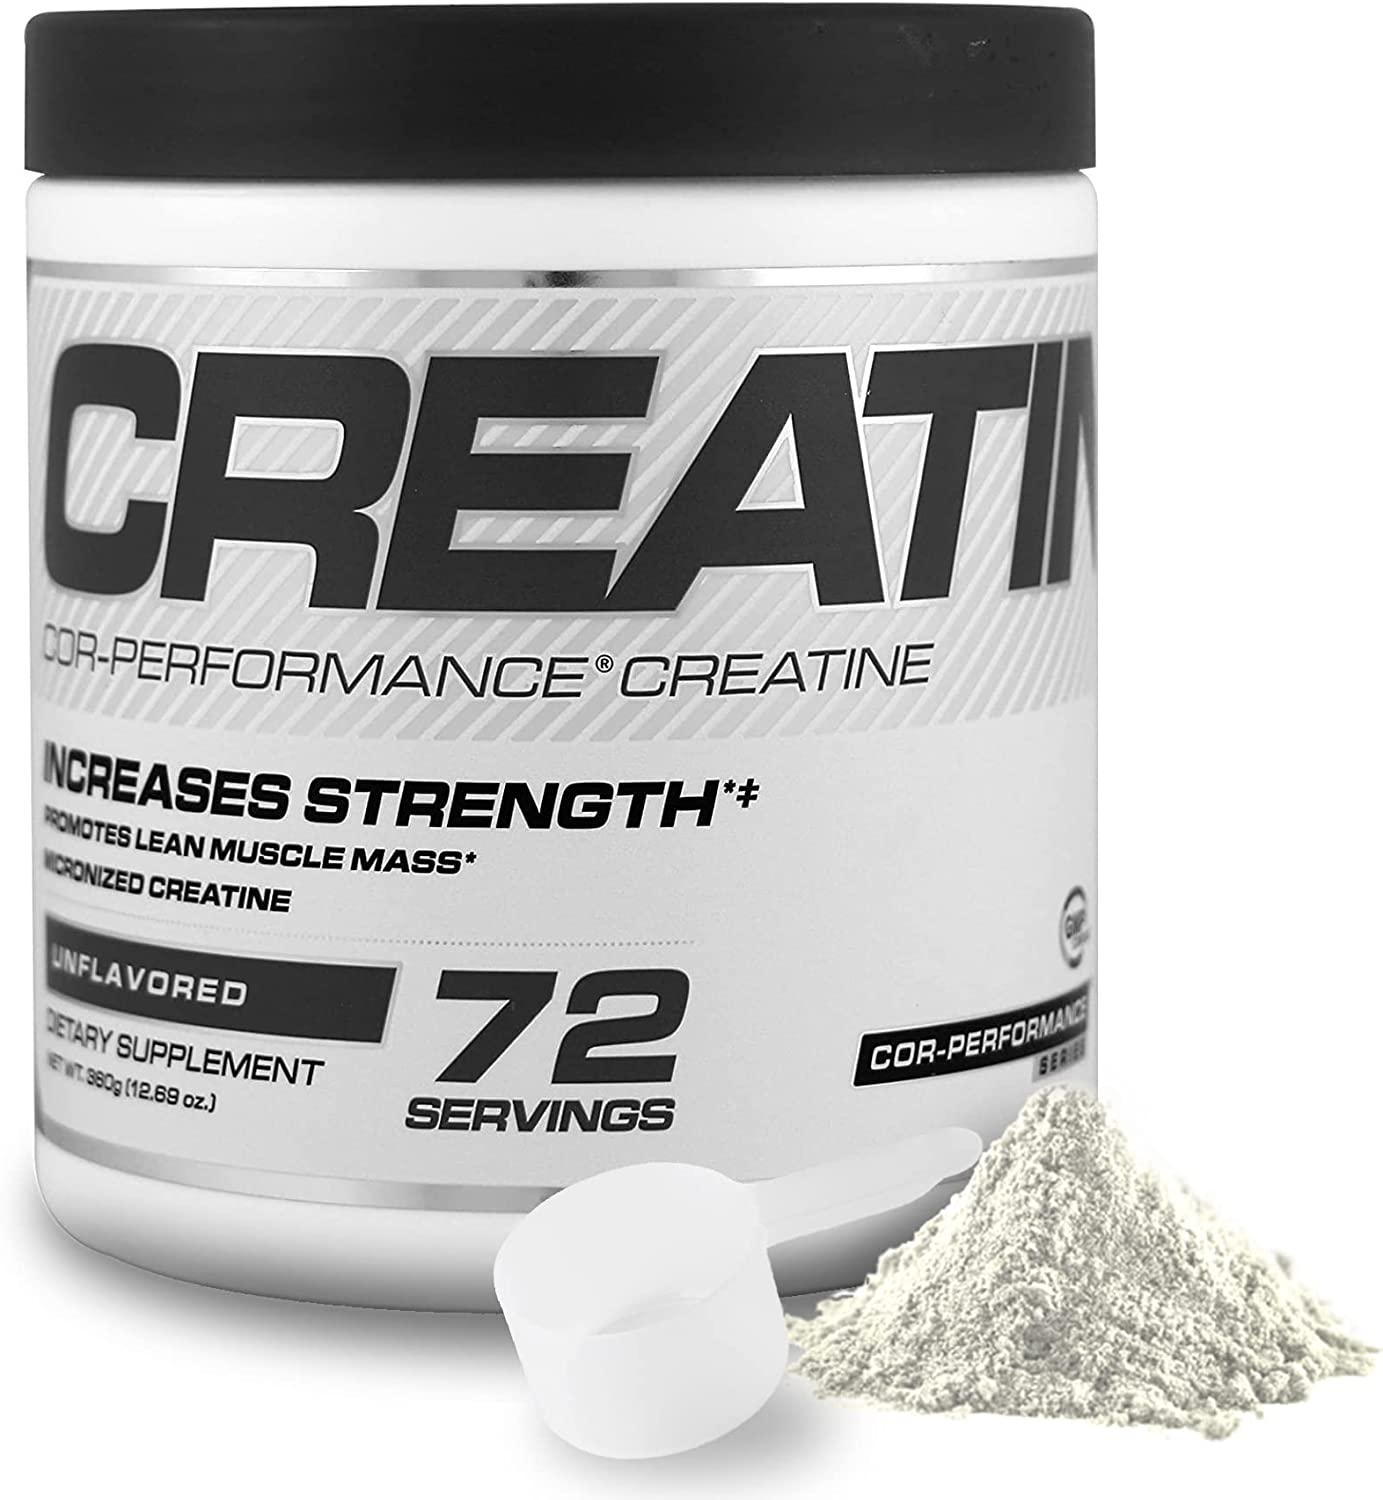 Amazon.com: Cellucor Cor-Performance Creatine Monohydrate for Strength and Muscle Growth, 72 Servings : Health & Household $17.99